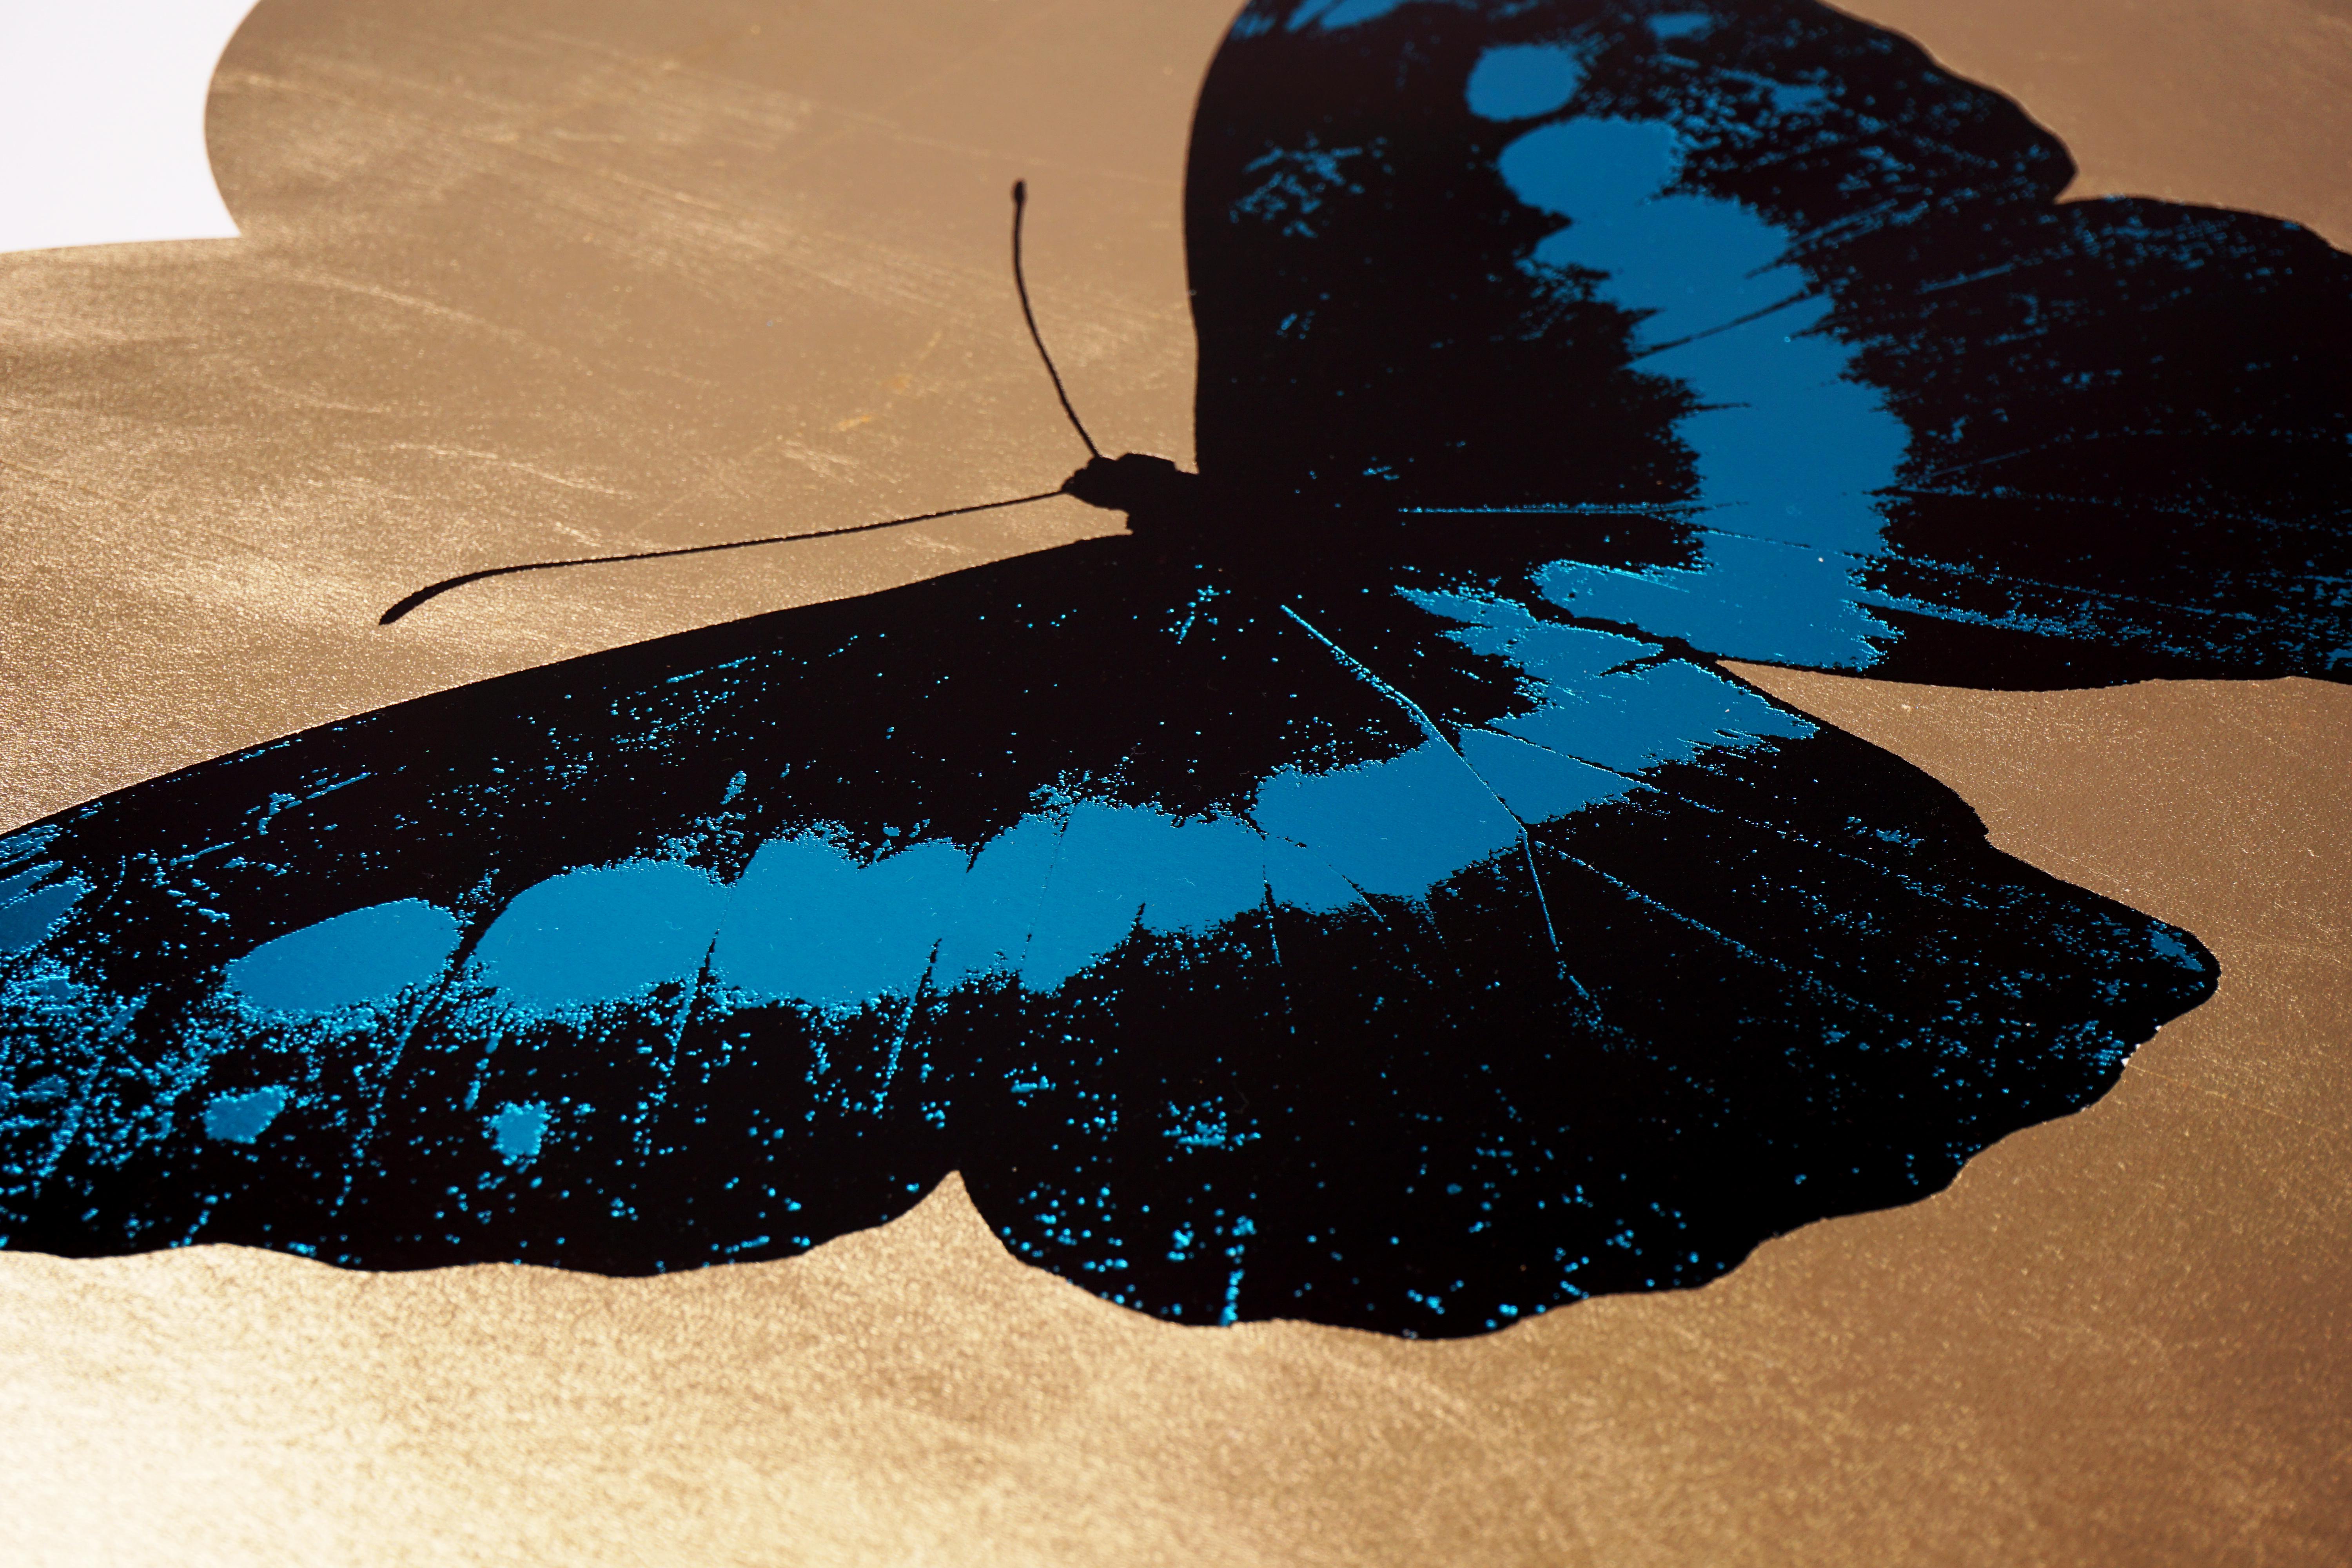 The 'I Love You' Butterfly in Turquoise and Gold is a limited edition silkscreen print by Damien Hirst. This uplifting and pop art work features a foil block iridescent butterfly, surrounded by a gold leaf heart and set on the crisp white background